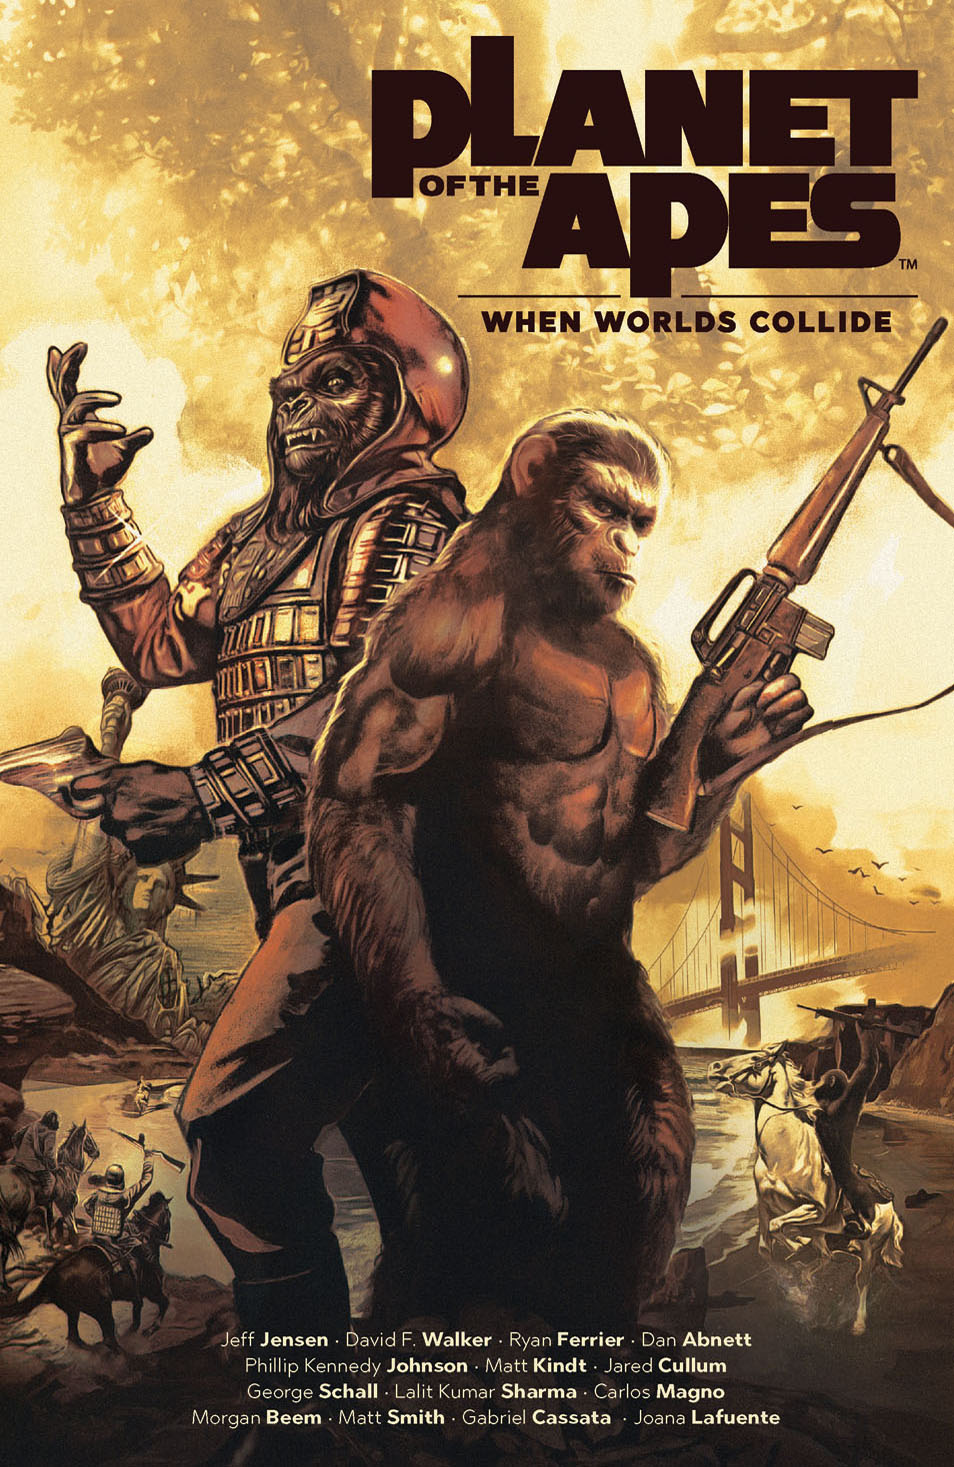 This image is the cover for the book Planet of the Apes: When Worlds Collide, Planet of the Apes